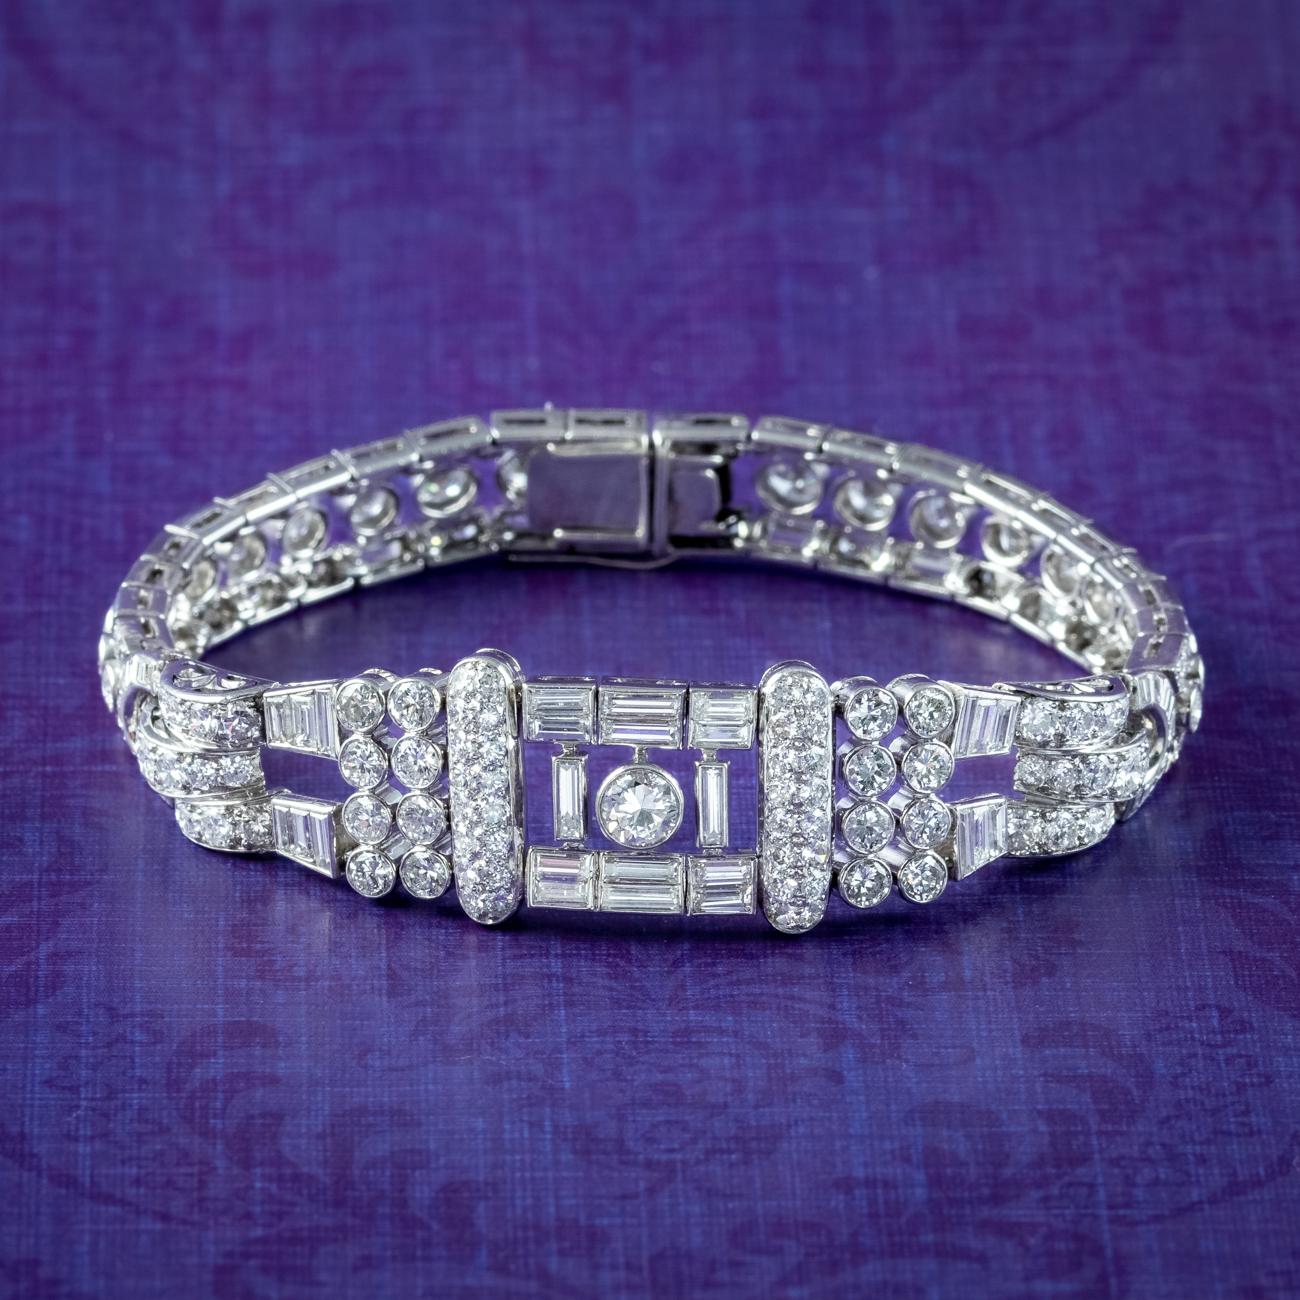 A magnificent Art Deco diamond bracelet from the 1920s decorated with a dazzling array of bright, clean diamonds in both brilliant and baguette cut. They have excellent VS1 clarity – H colour with the largest weighing 0.50ct in the centre, bringing